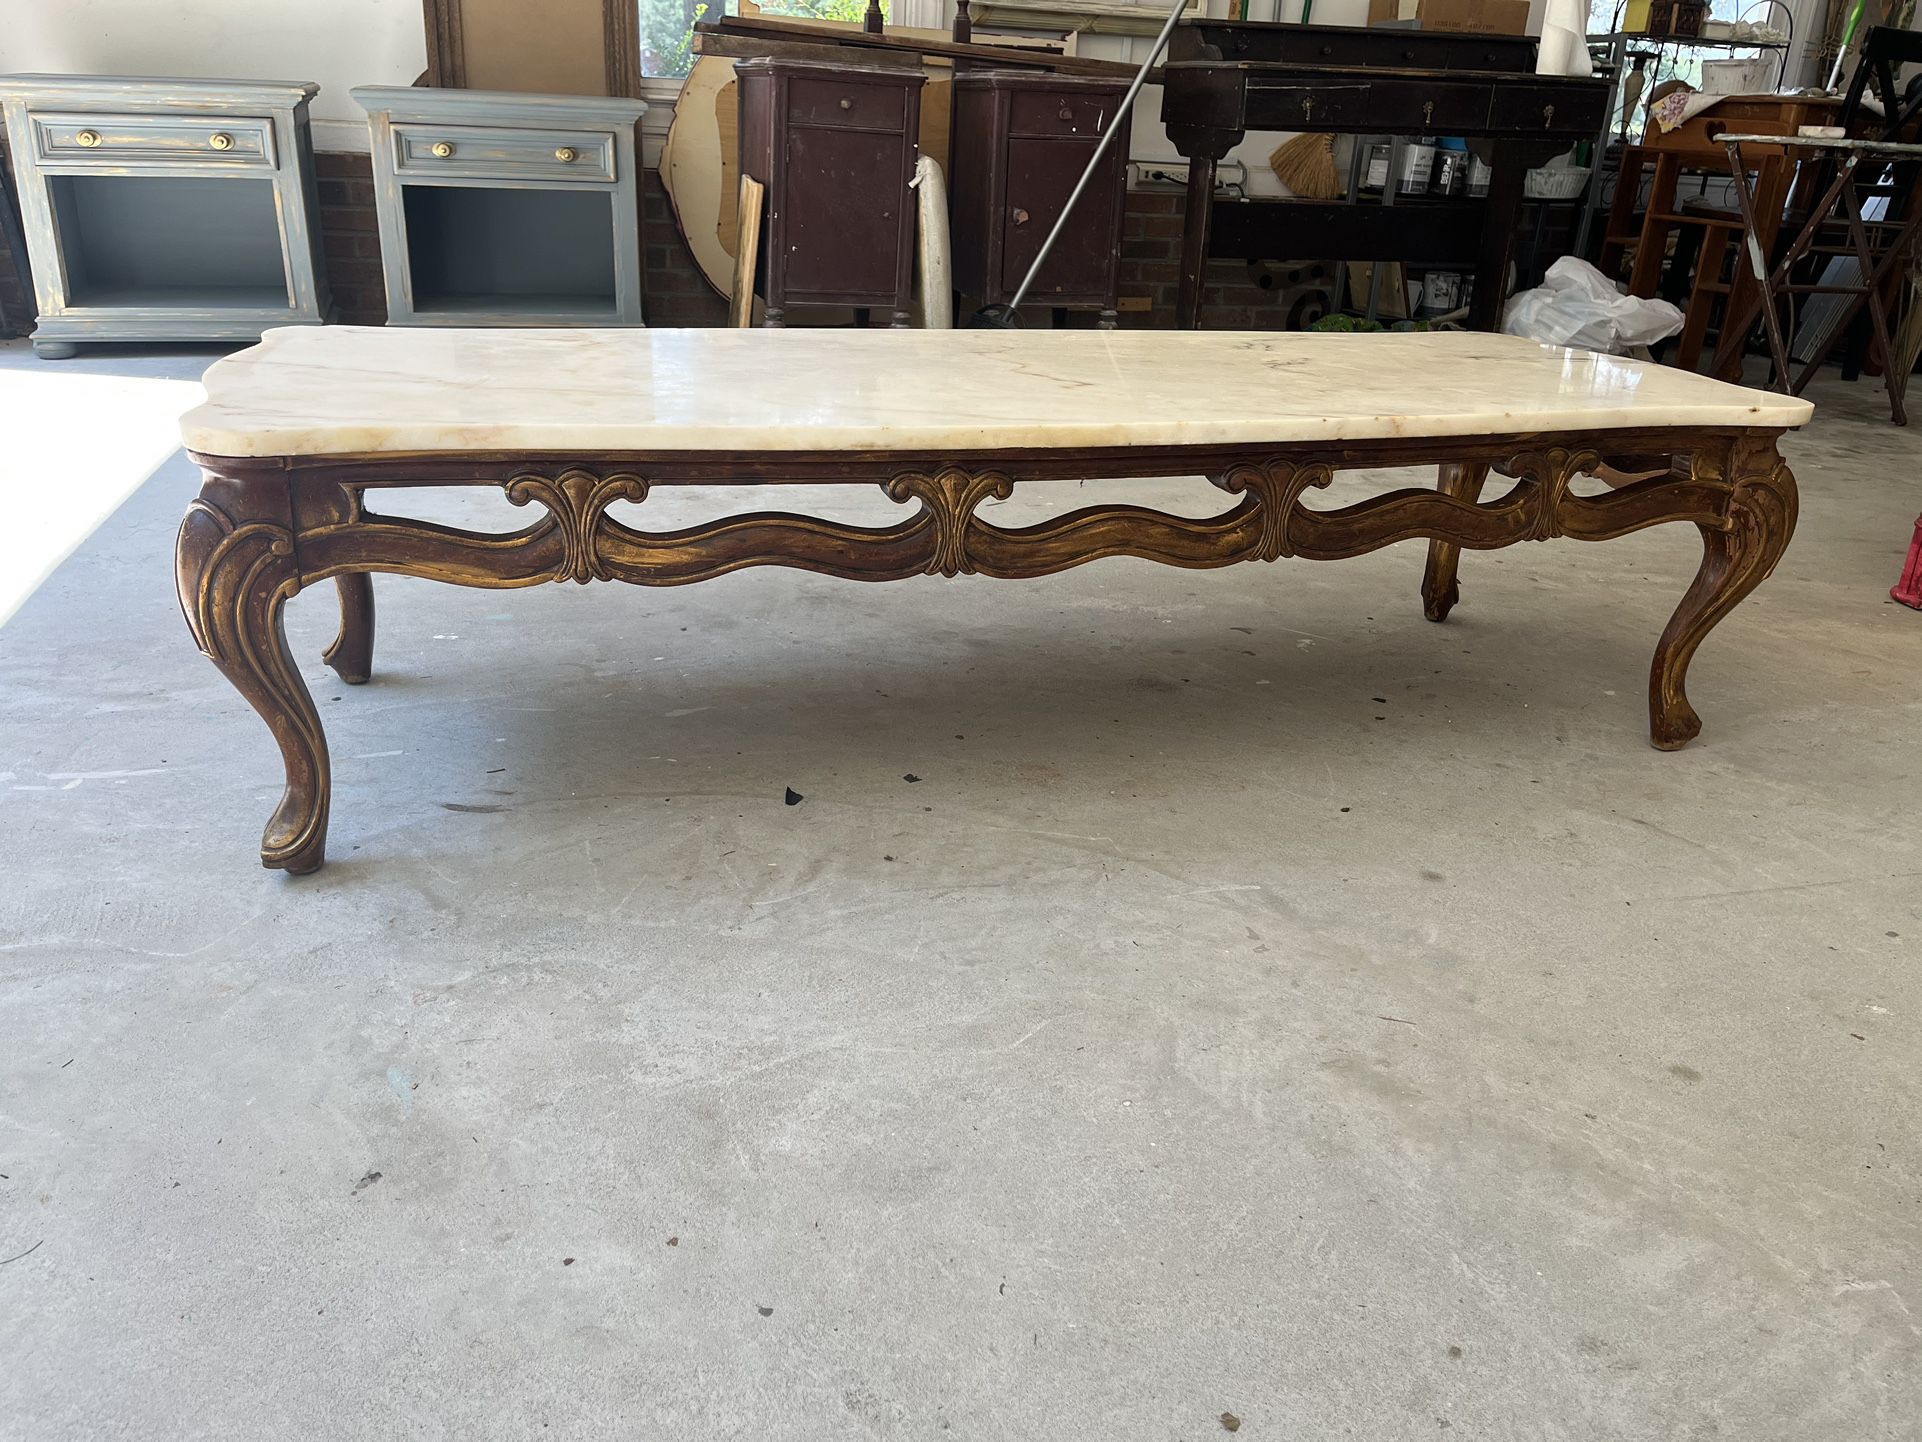 Transformed Ornate Solid Wood Coffee Table With Real Marble Top.